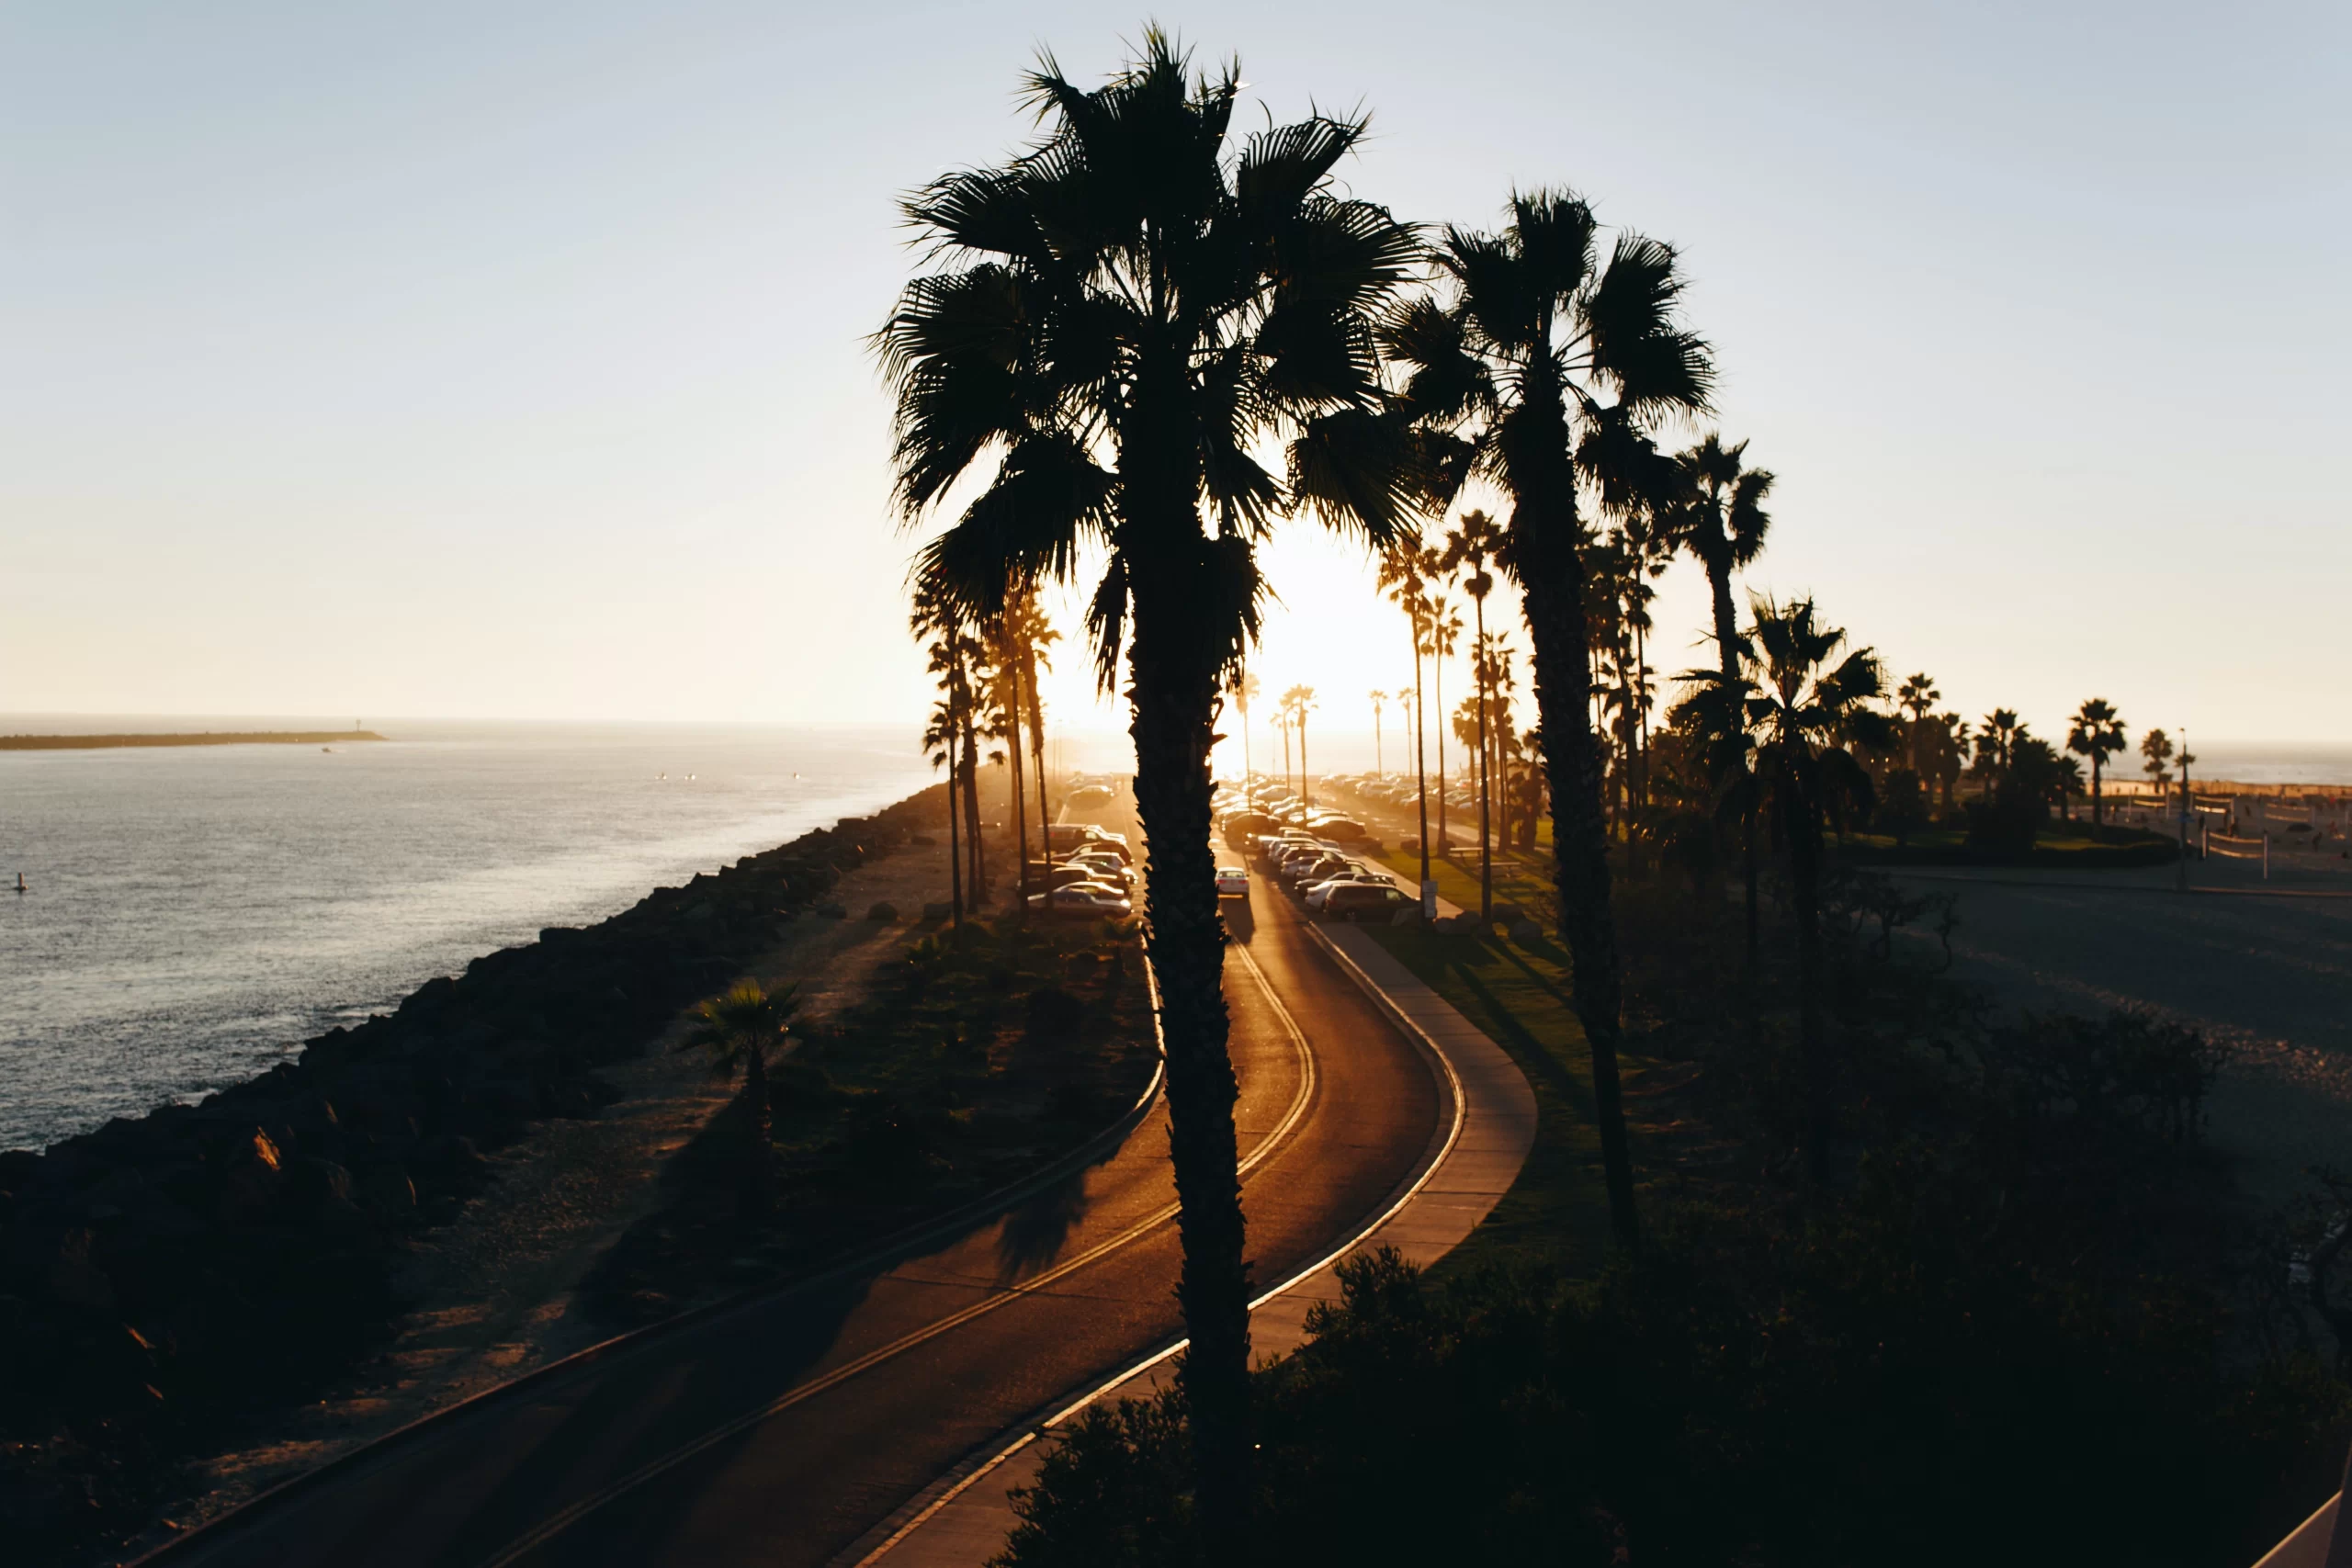 Mission Beach, San Diego, United States Published on October 3, 2016 Canon, EOS 6D Free to use under the Unsplash License Palm tree boulevard